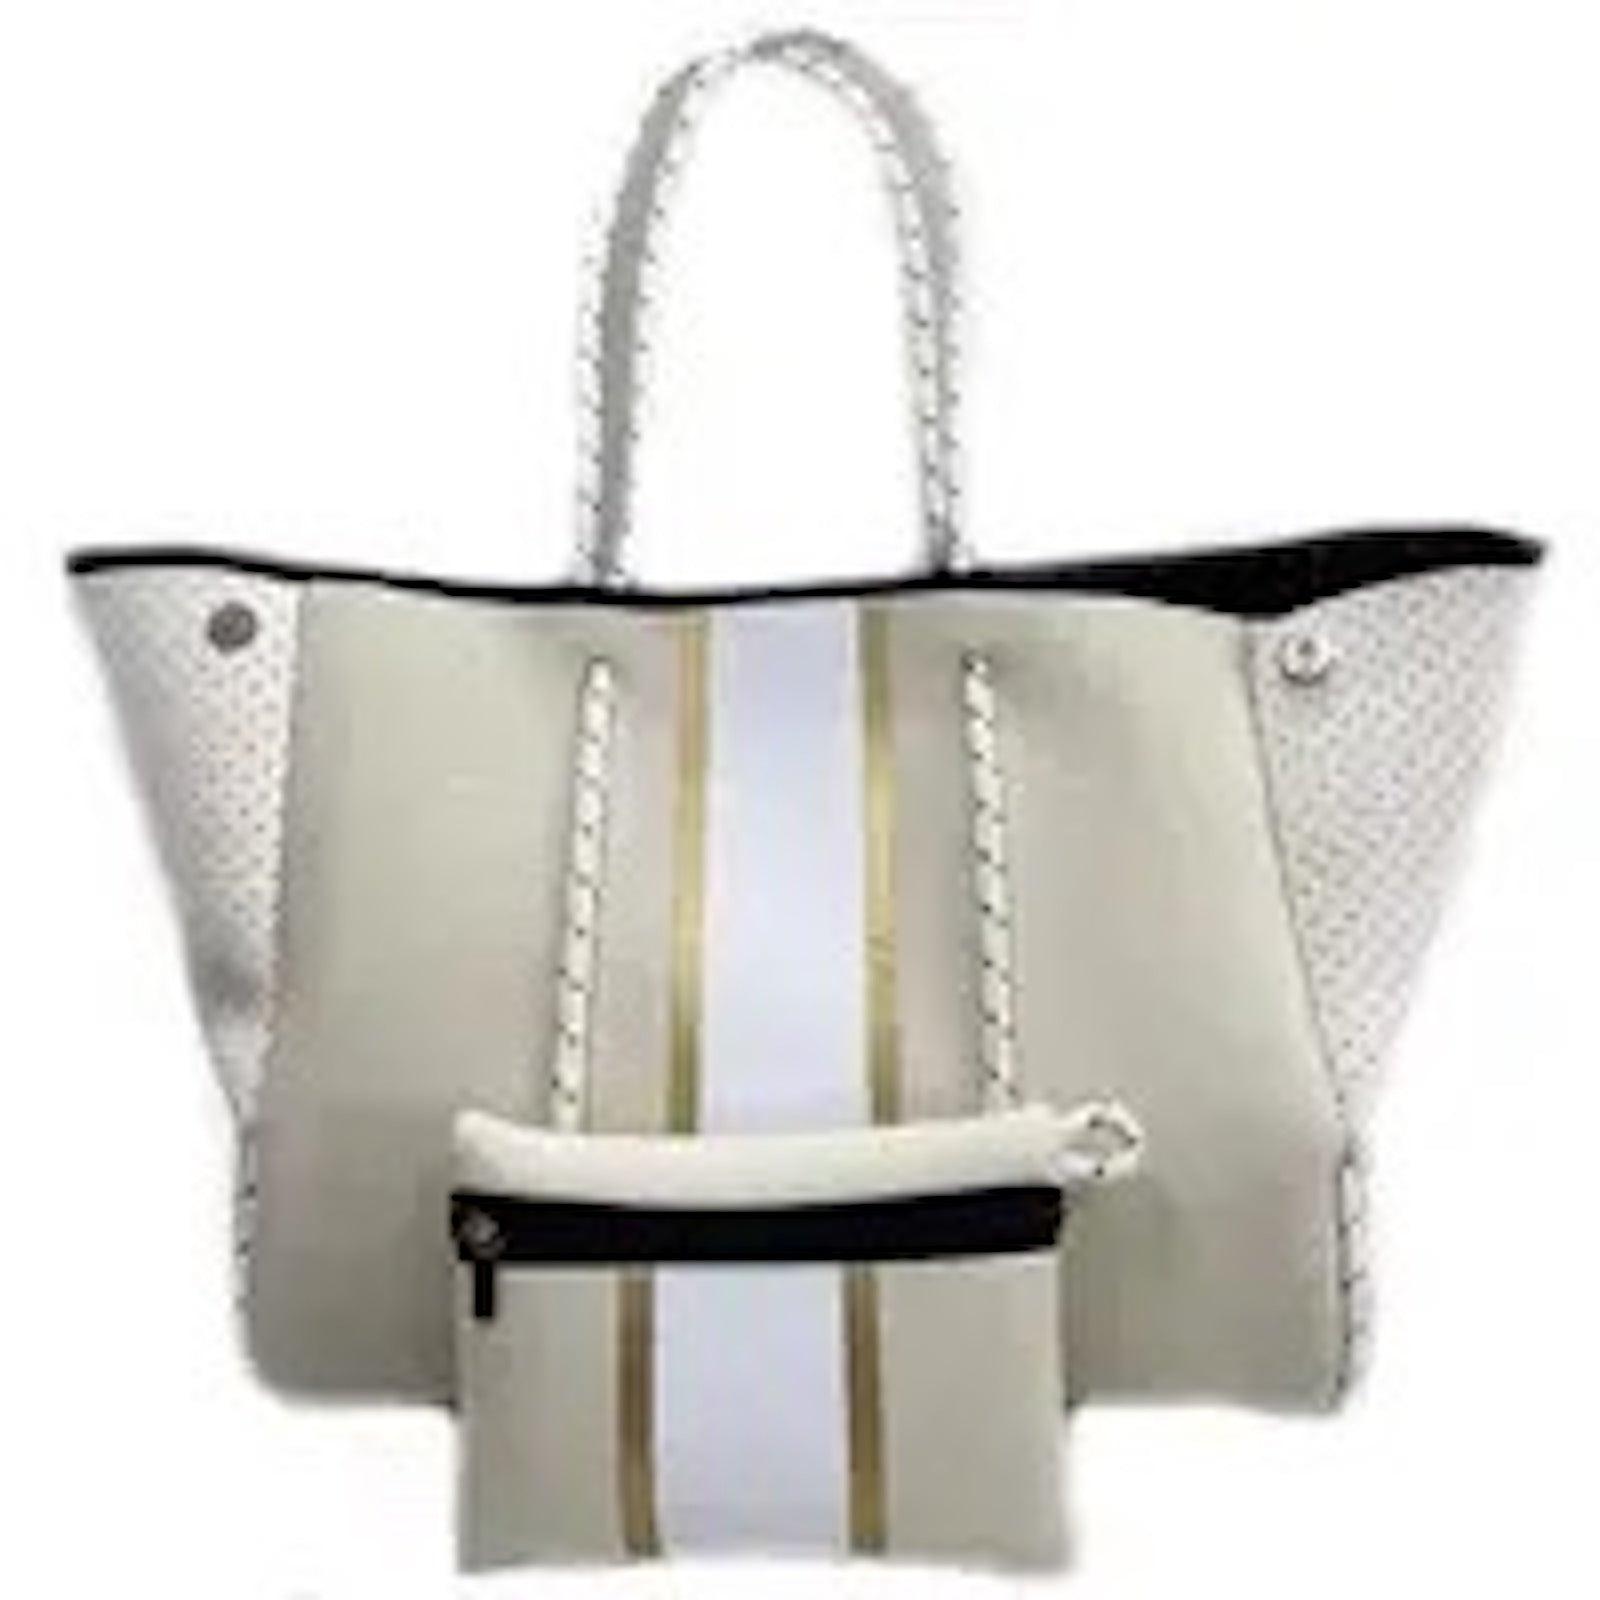 The perfect travel companion Neoprene Bag/Tote - BTK COLLECTION